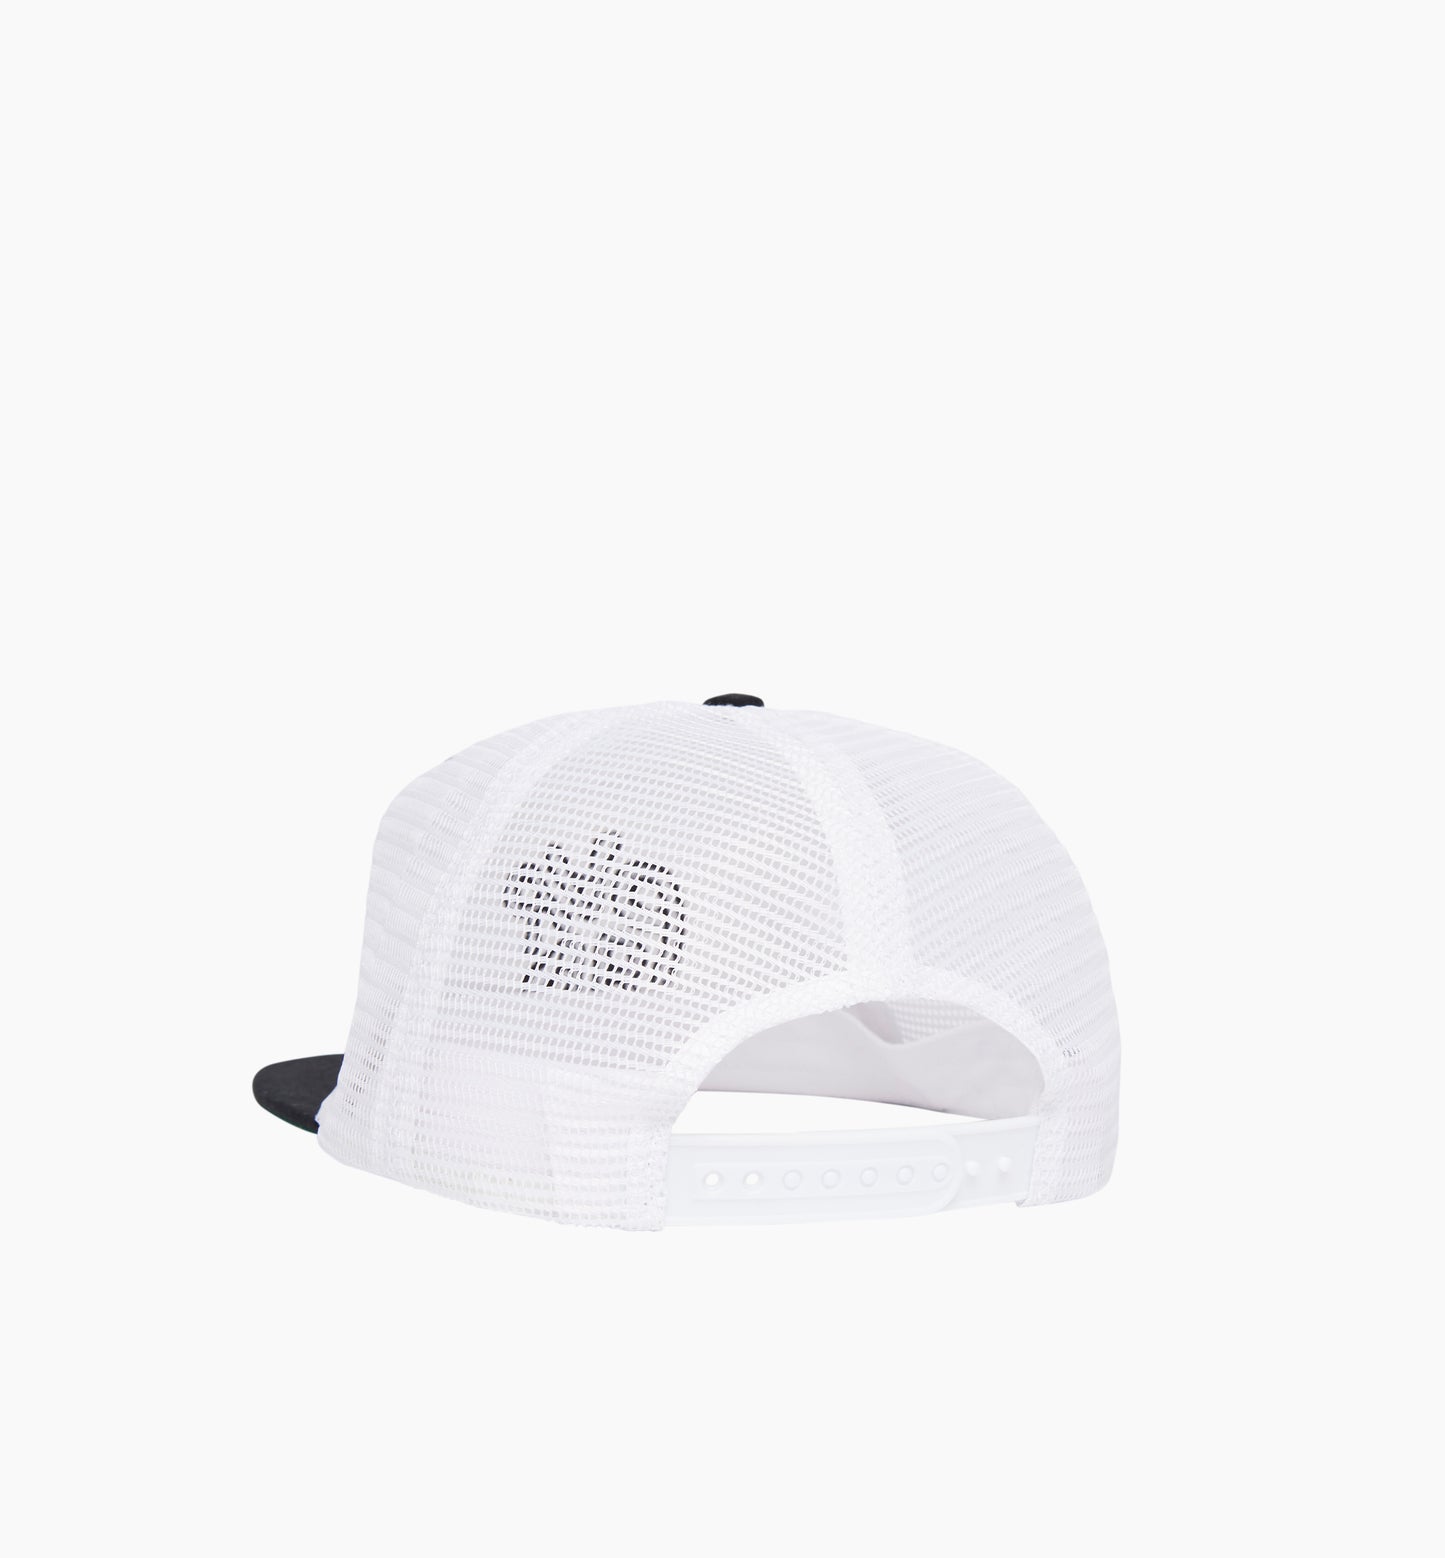 By Parra 1976 Logo 5 Panel Hat White